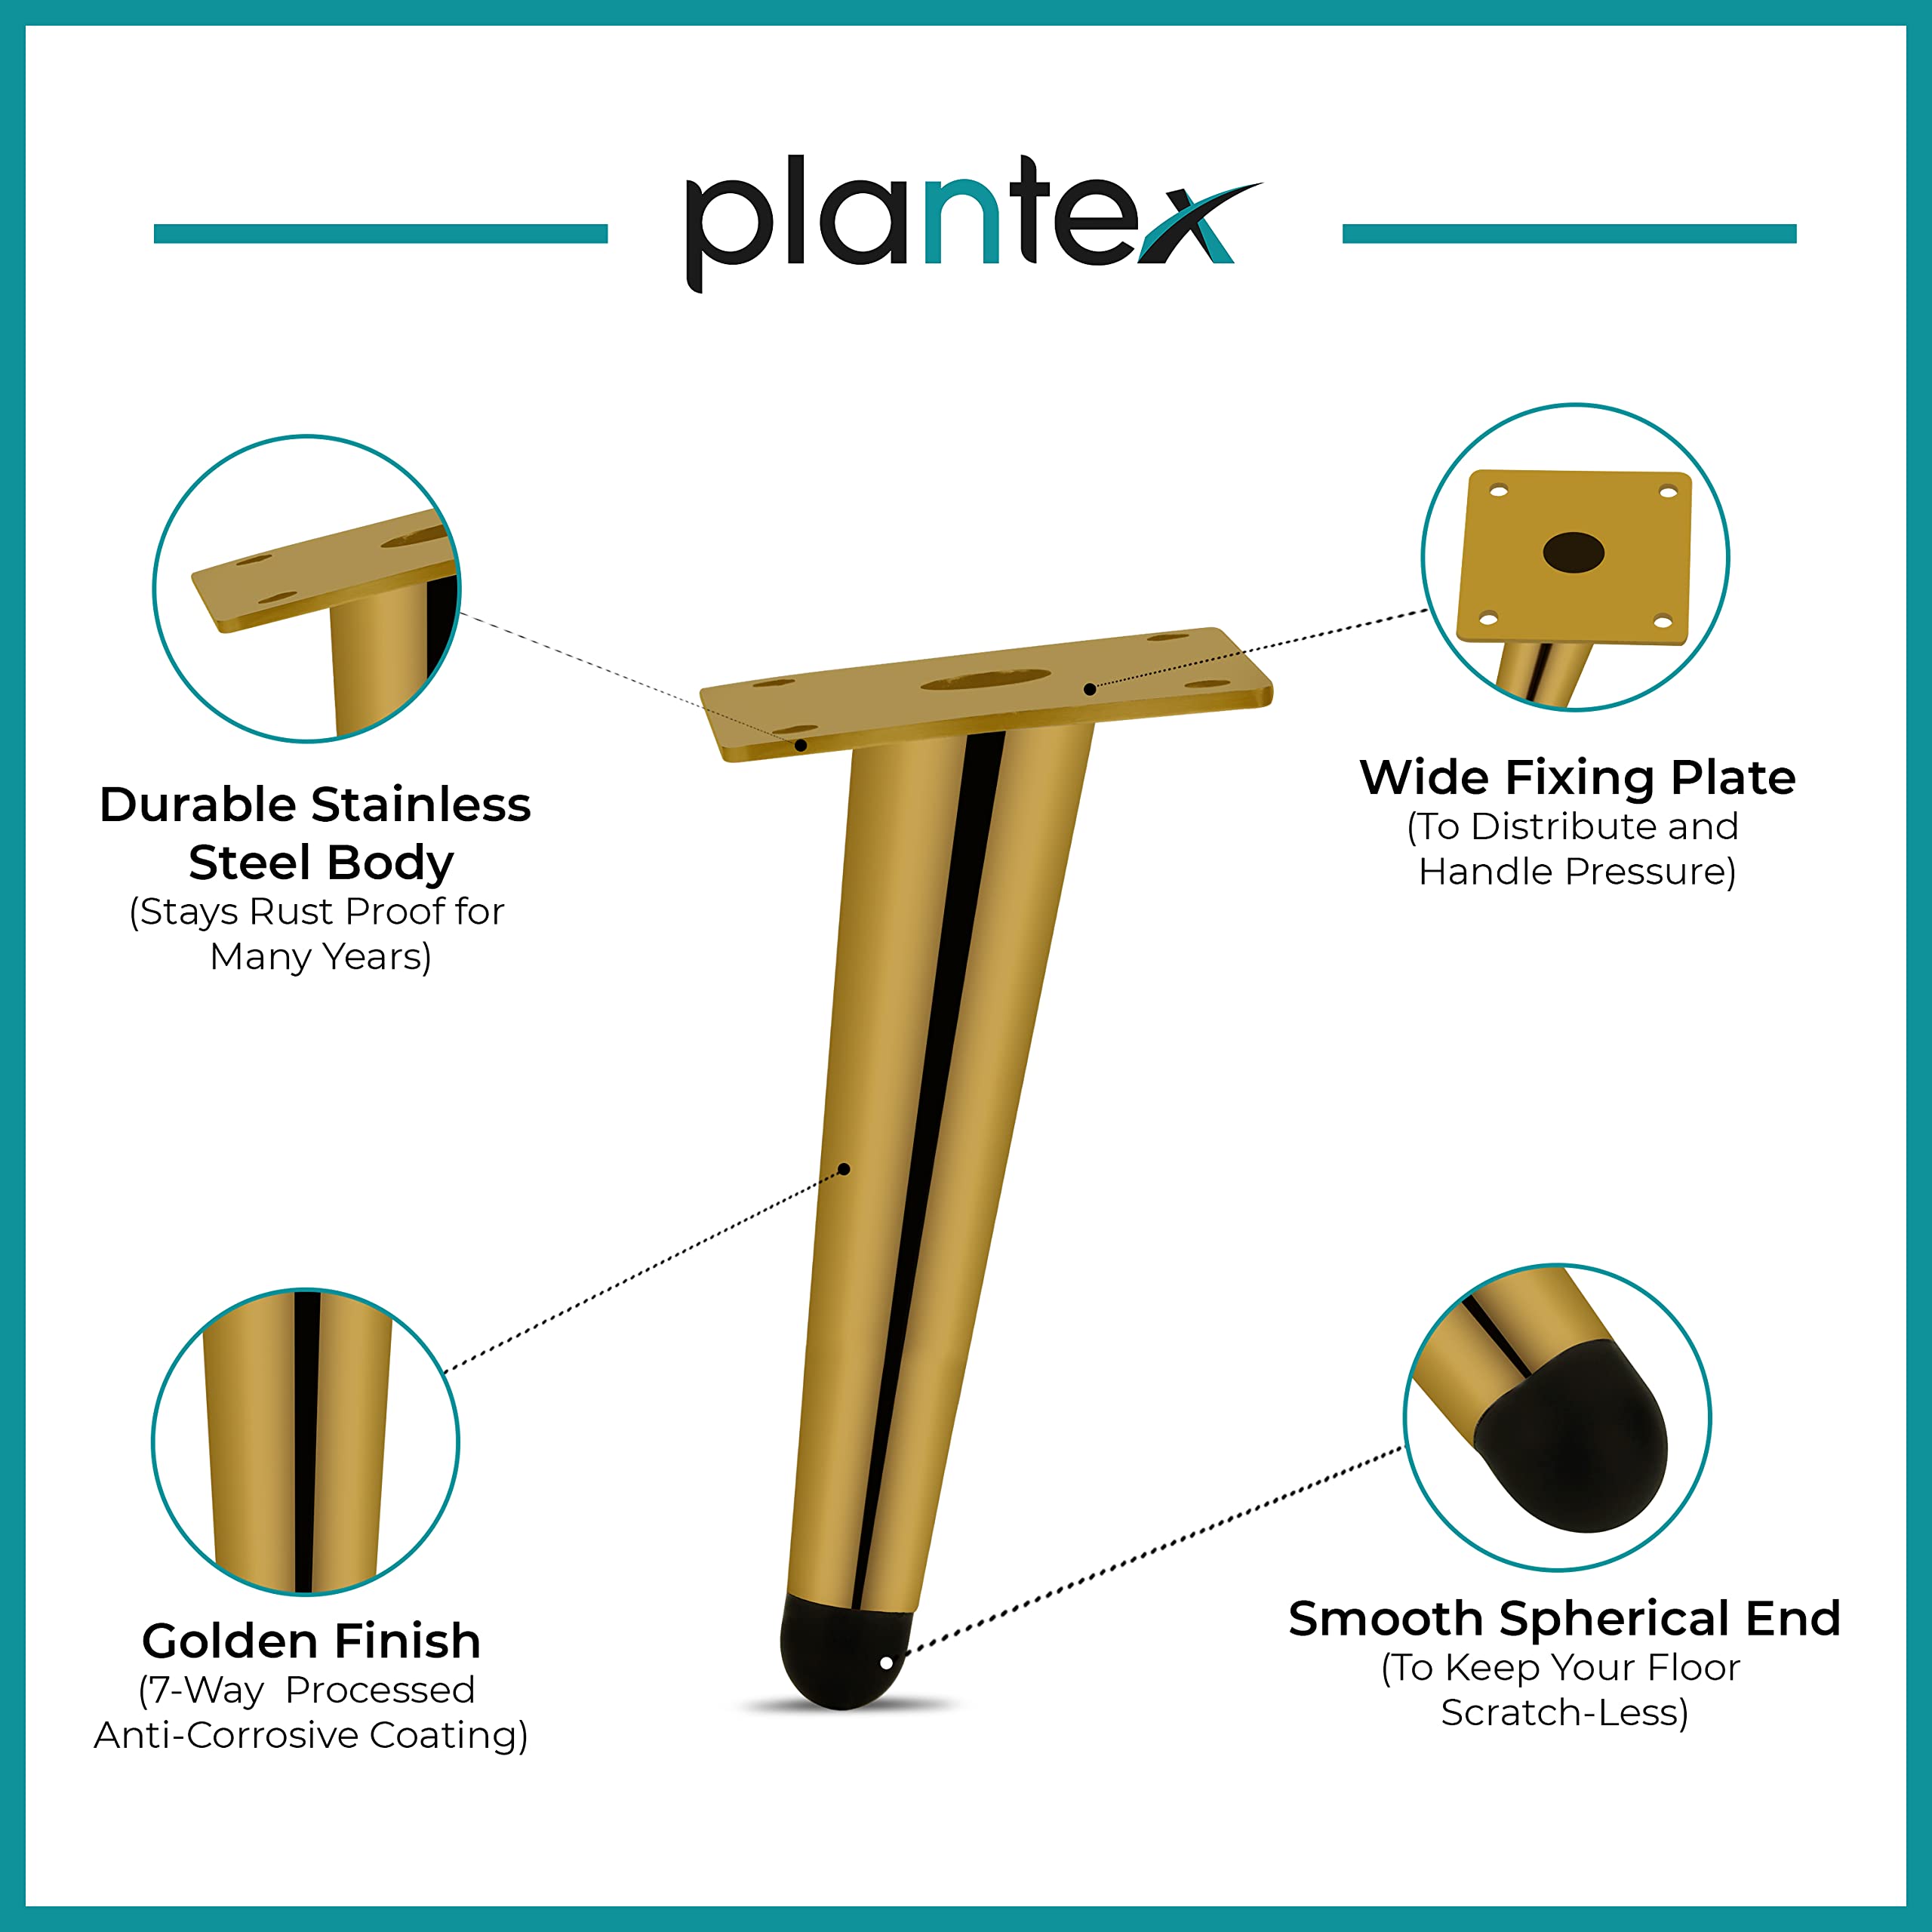 Plantex 304 Grade Stainless Steel 6 inch Sofa Leg/Bed Furniture Leg Pair for Home Furnitures (DTS-54-Gold) – 6 Pcs